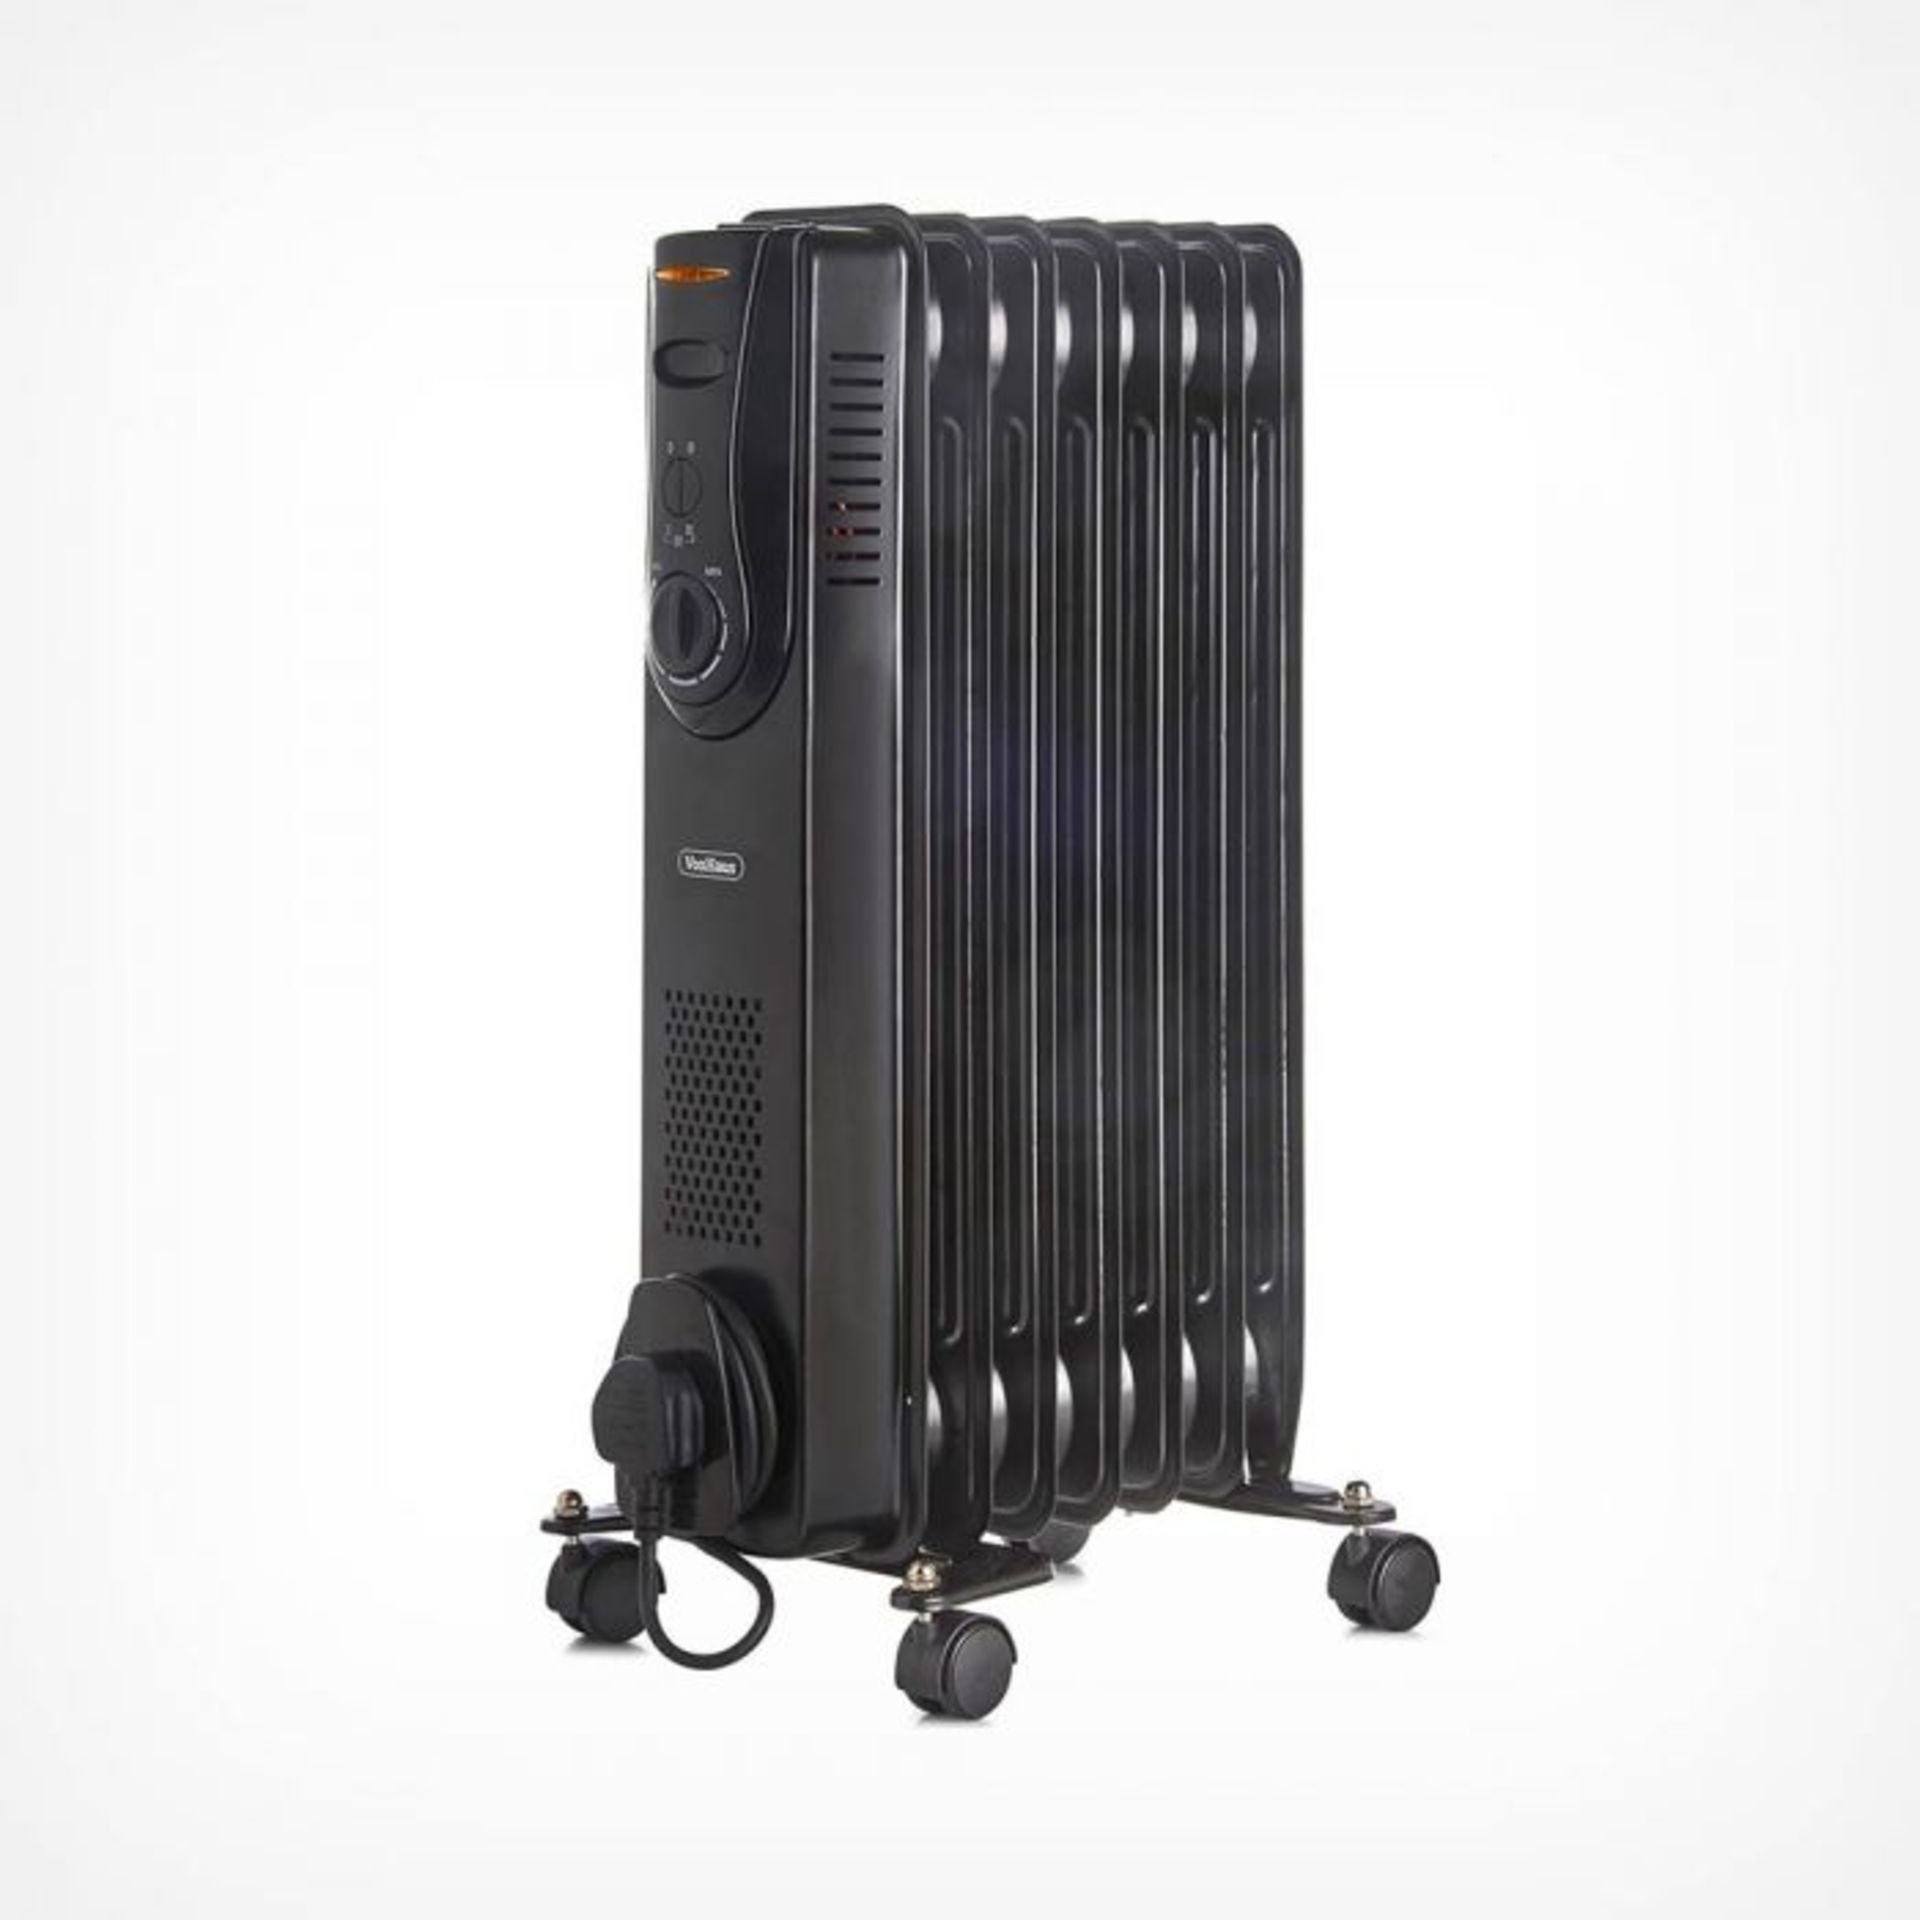 (S347) 7 Fin 1500W Oil Filled Radiator - Black Powerful 1500W radiator with 7 oil-filled fins ... - Image 2 of 3